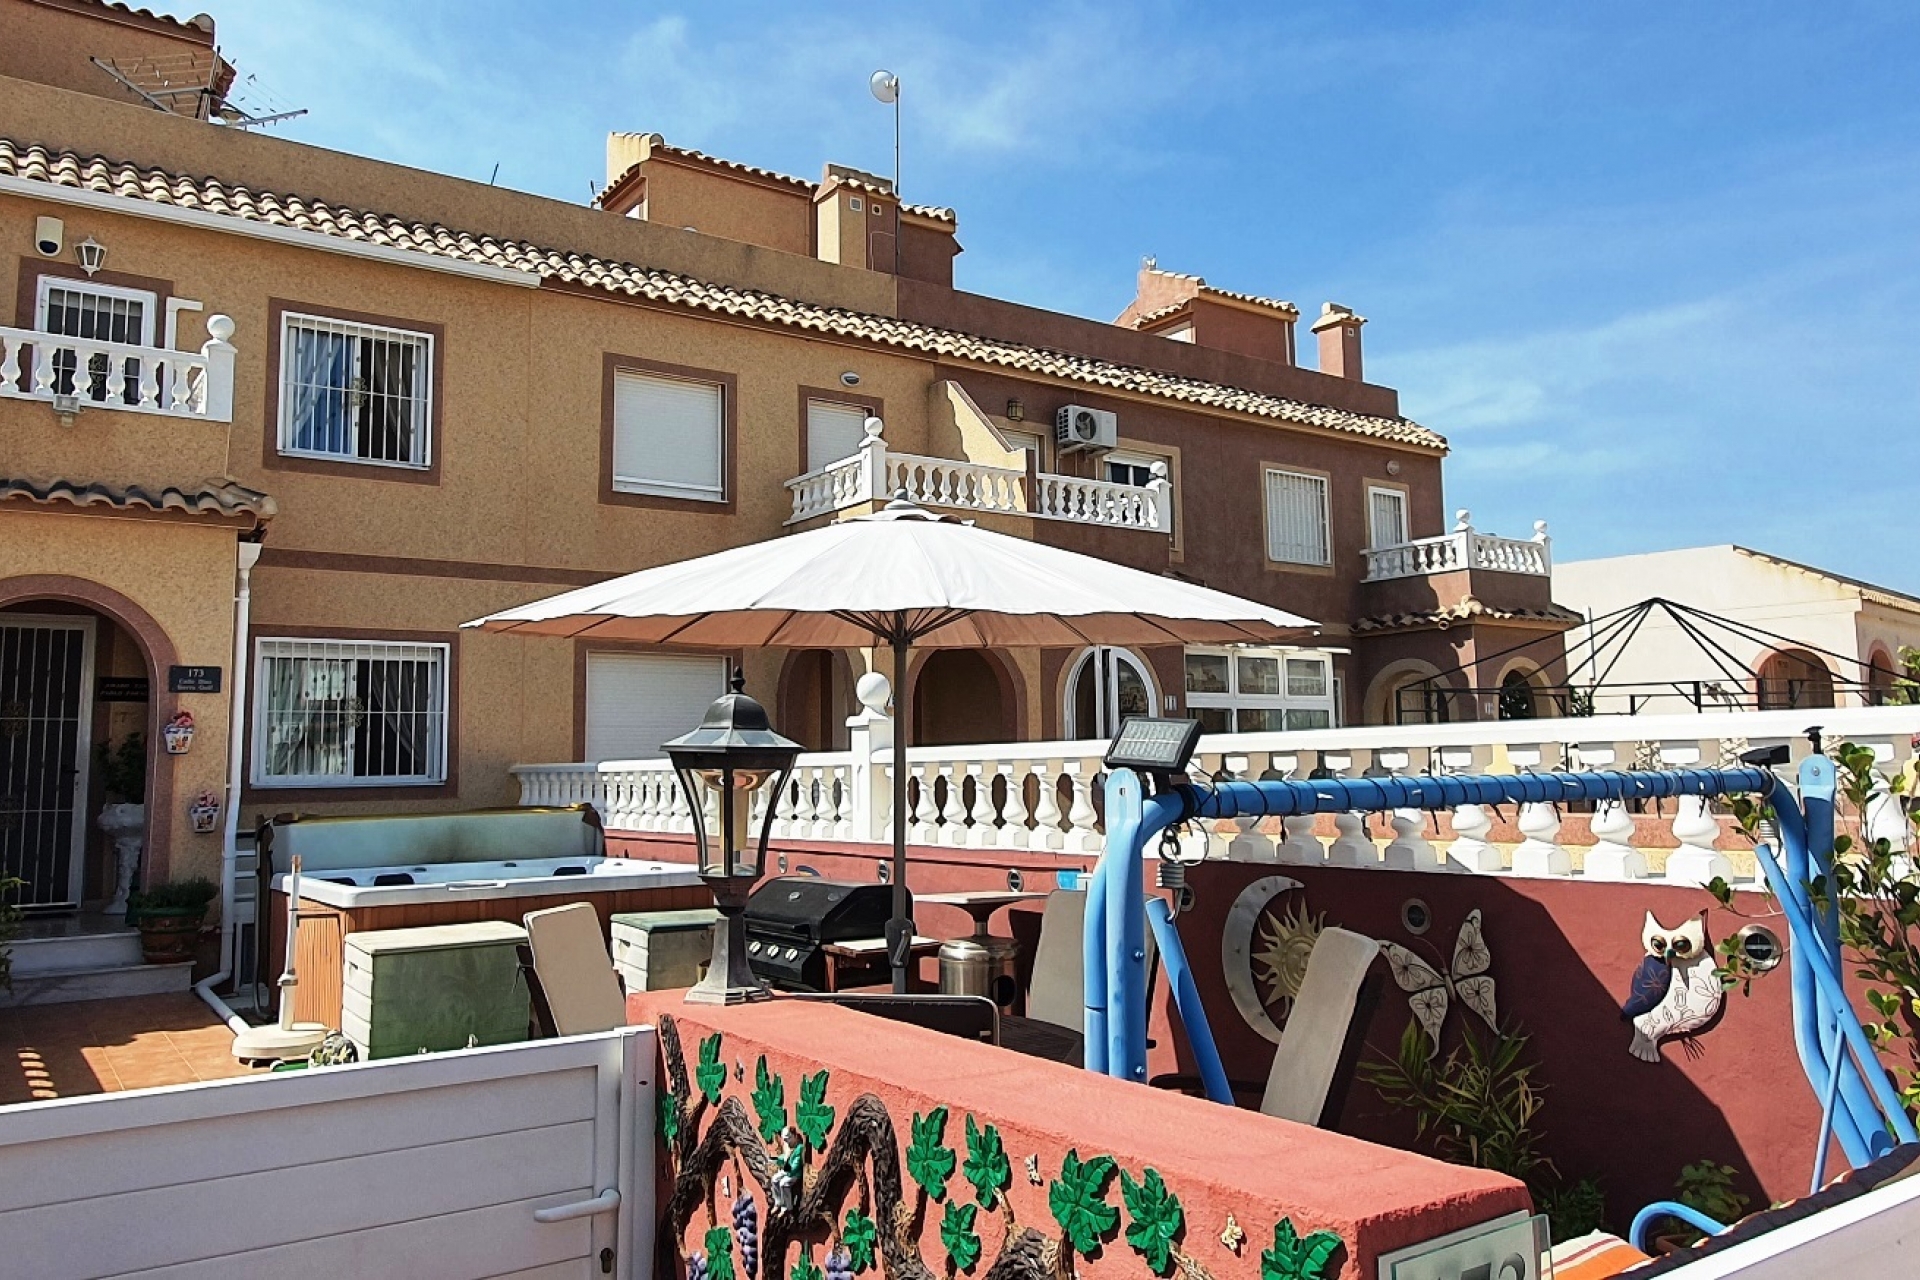 Property for sale - Townhouse for sale - Balsicas - Sierra Golf